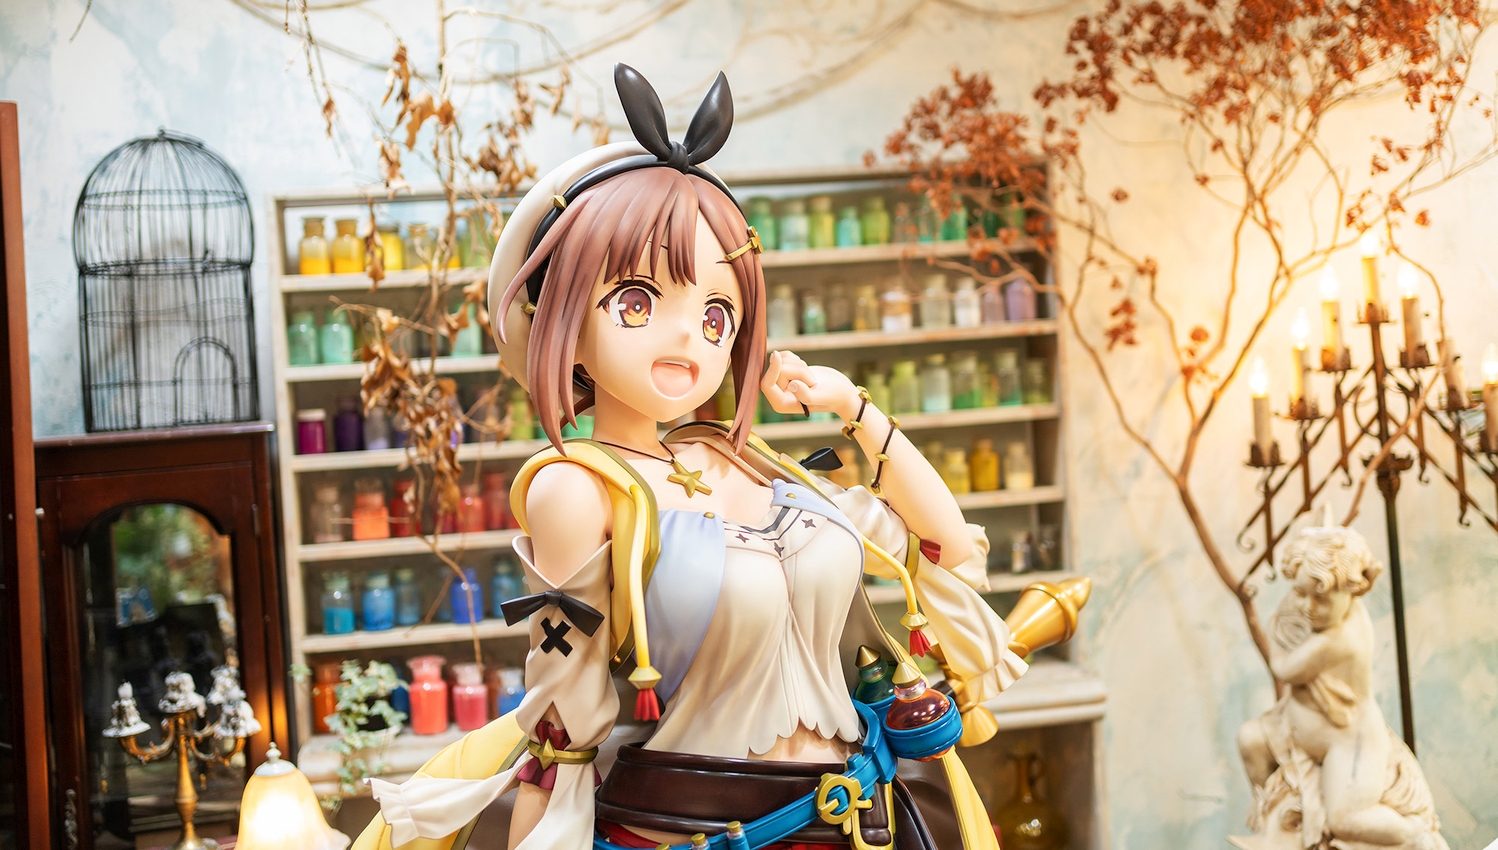 Life-Sized Statue Of Atelier Ryza’s Heroine Ready For Pre-Order But Costs Over $20,000